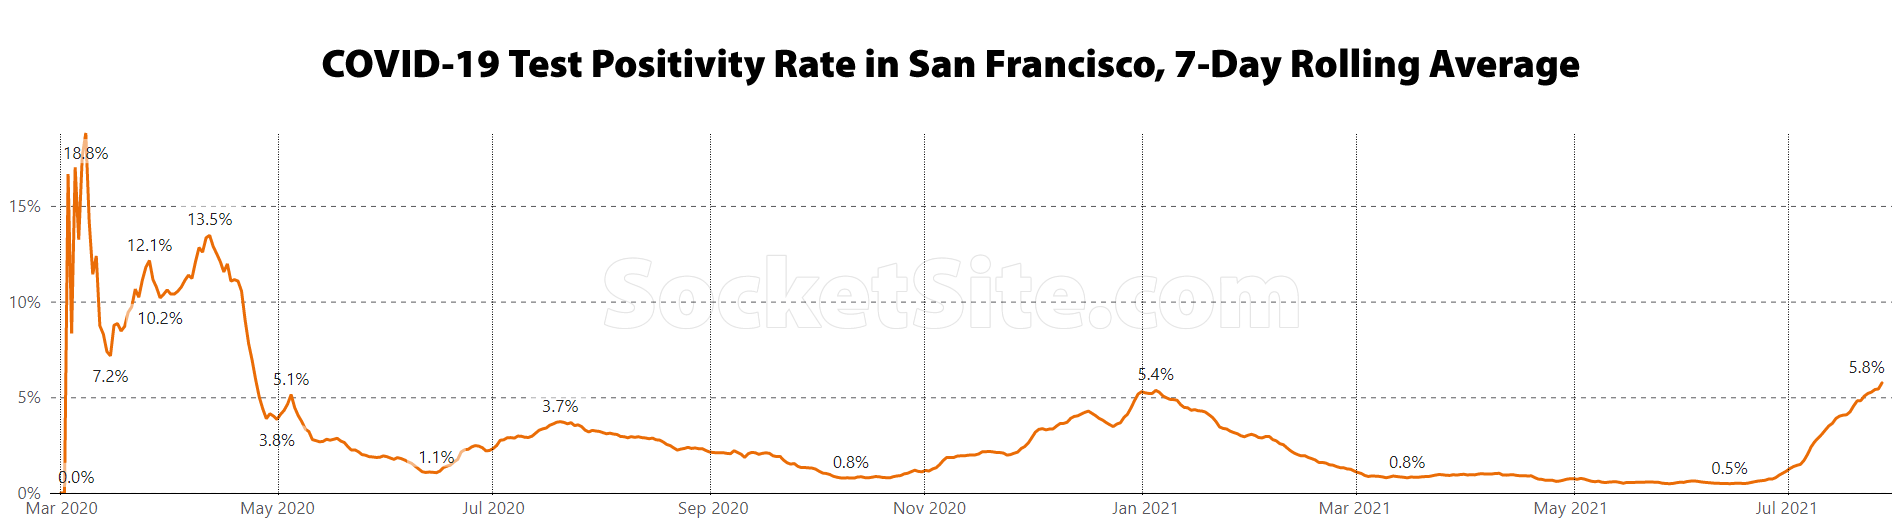 COVID Test Positive Rate Hits a 15-Month High in S.F. [UPDATED]